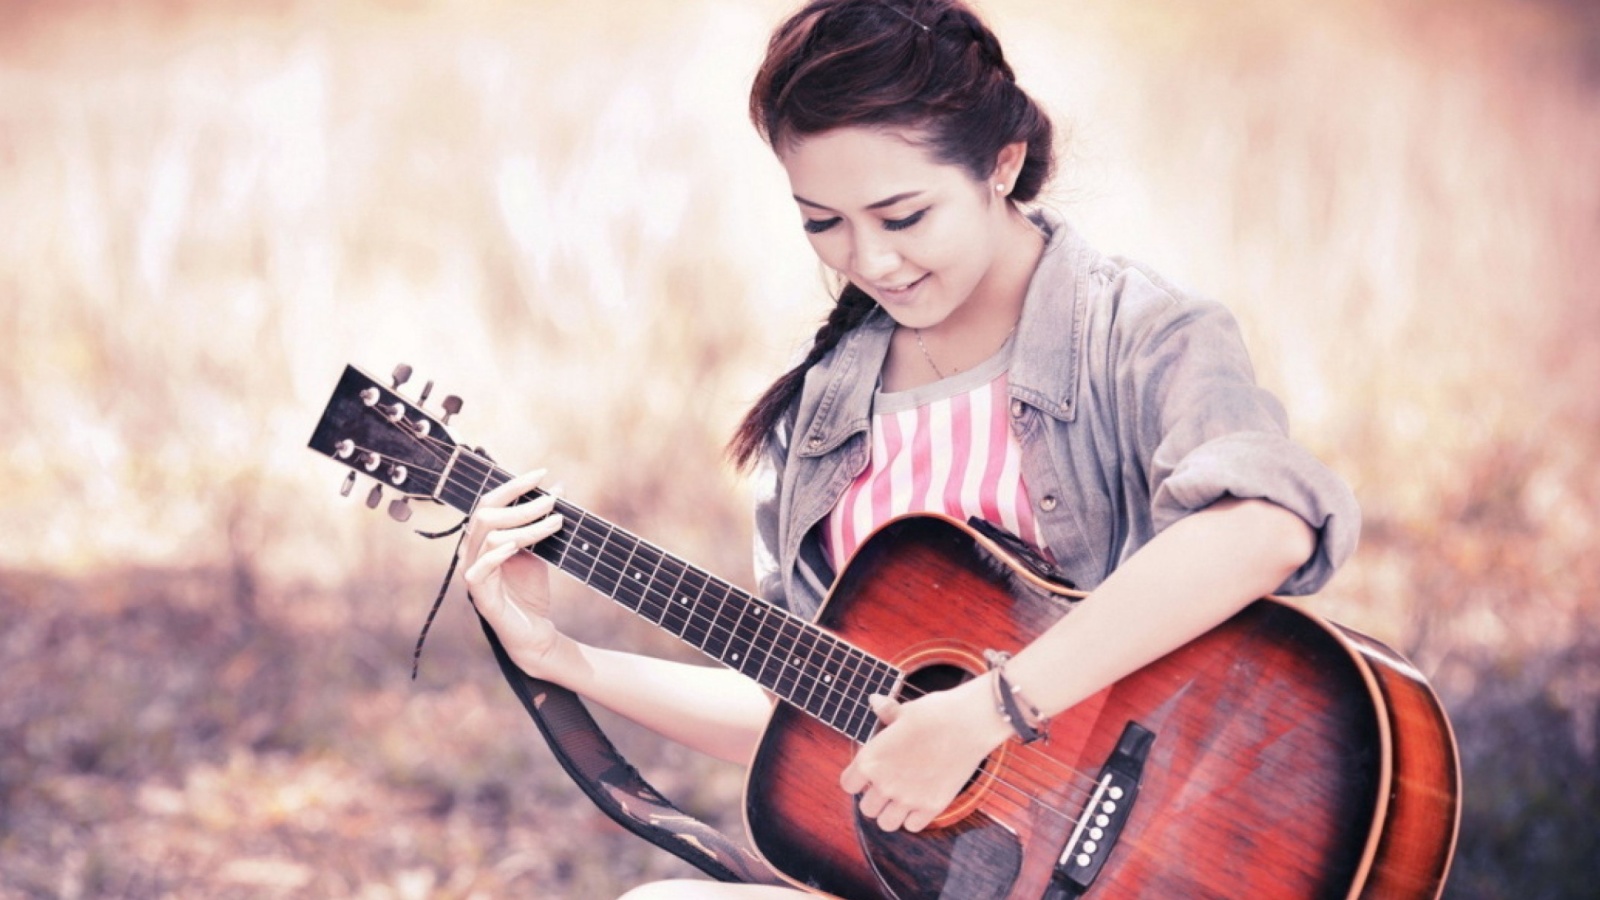 Chinese girl with guitar wallpaper 1600x900